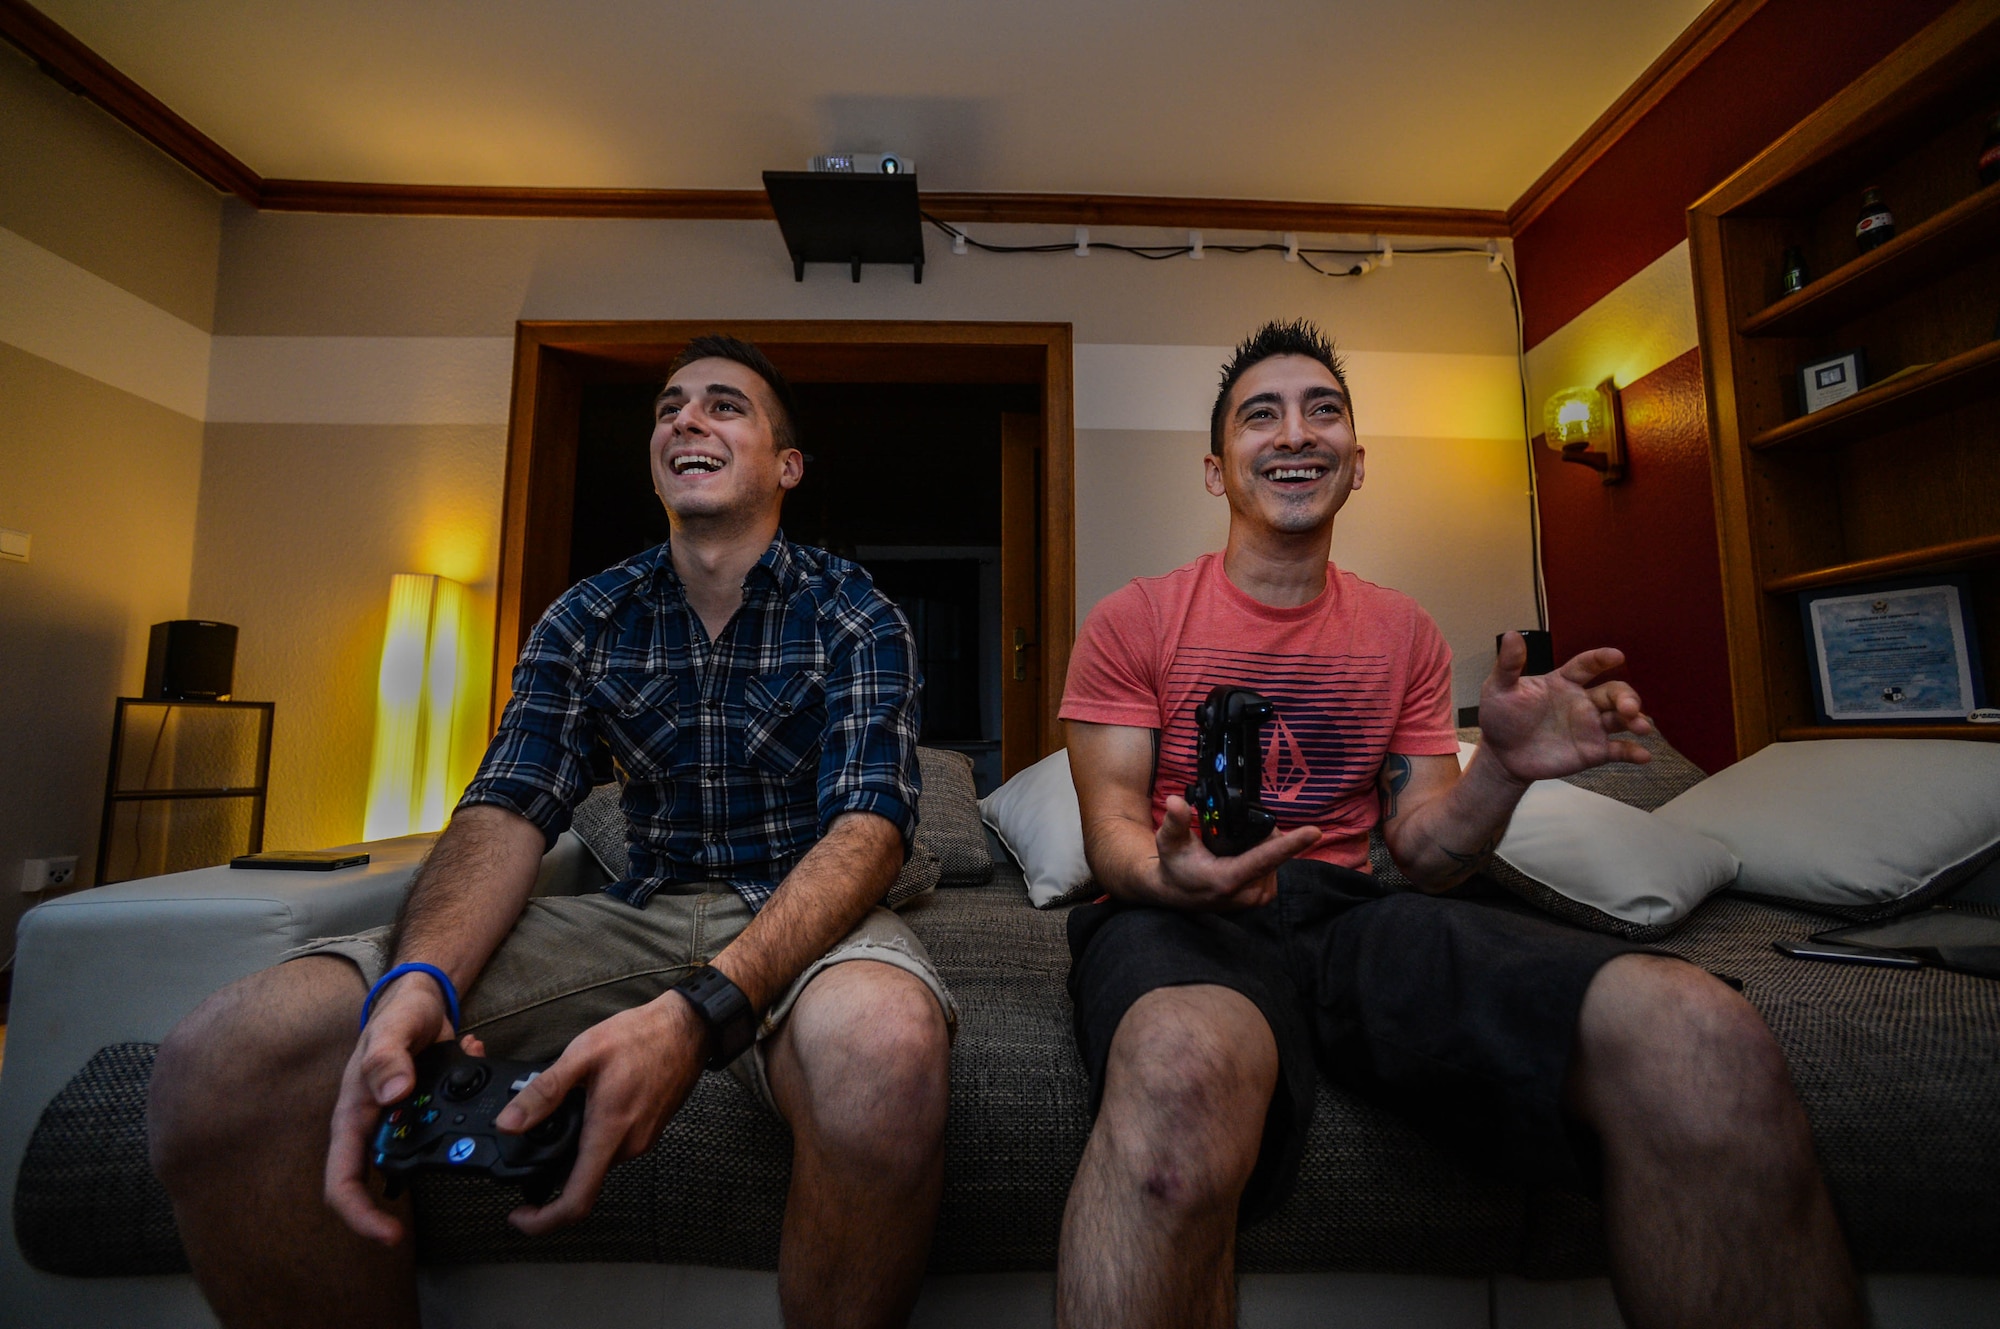 U.S. Air Force Senior Airman Edward Lomelin, 606th Air Control Squadron radio frequencies transmission systems technician and native of Austin, Texas, and U.S. Air Force Airman 1st Class Chris Lomelin, 606th ACS power production technician and native of Austin, Texas, play video games together at their home in Bitburg, Germany, Sept. 27, 2014. The 606 ACS is a self-contained mobile combat unit with Airmen covering more than 21 specialties maintaining over $170 million worth of equipment. The squadron routinely trains to prepare for deployments. The Lomelins deployed together to support Operation Enduring Freedom. (U.S. Air Force photo by Airman 1st Class Kyle Gese/Released)